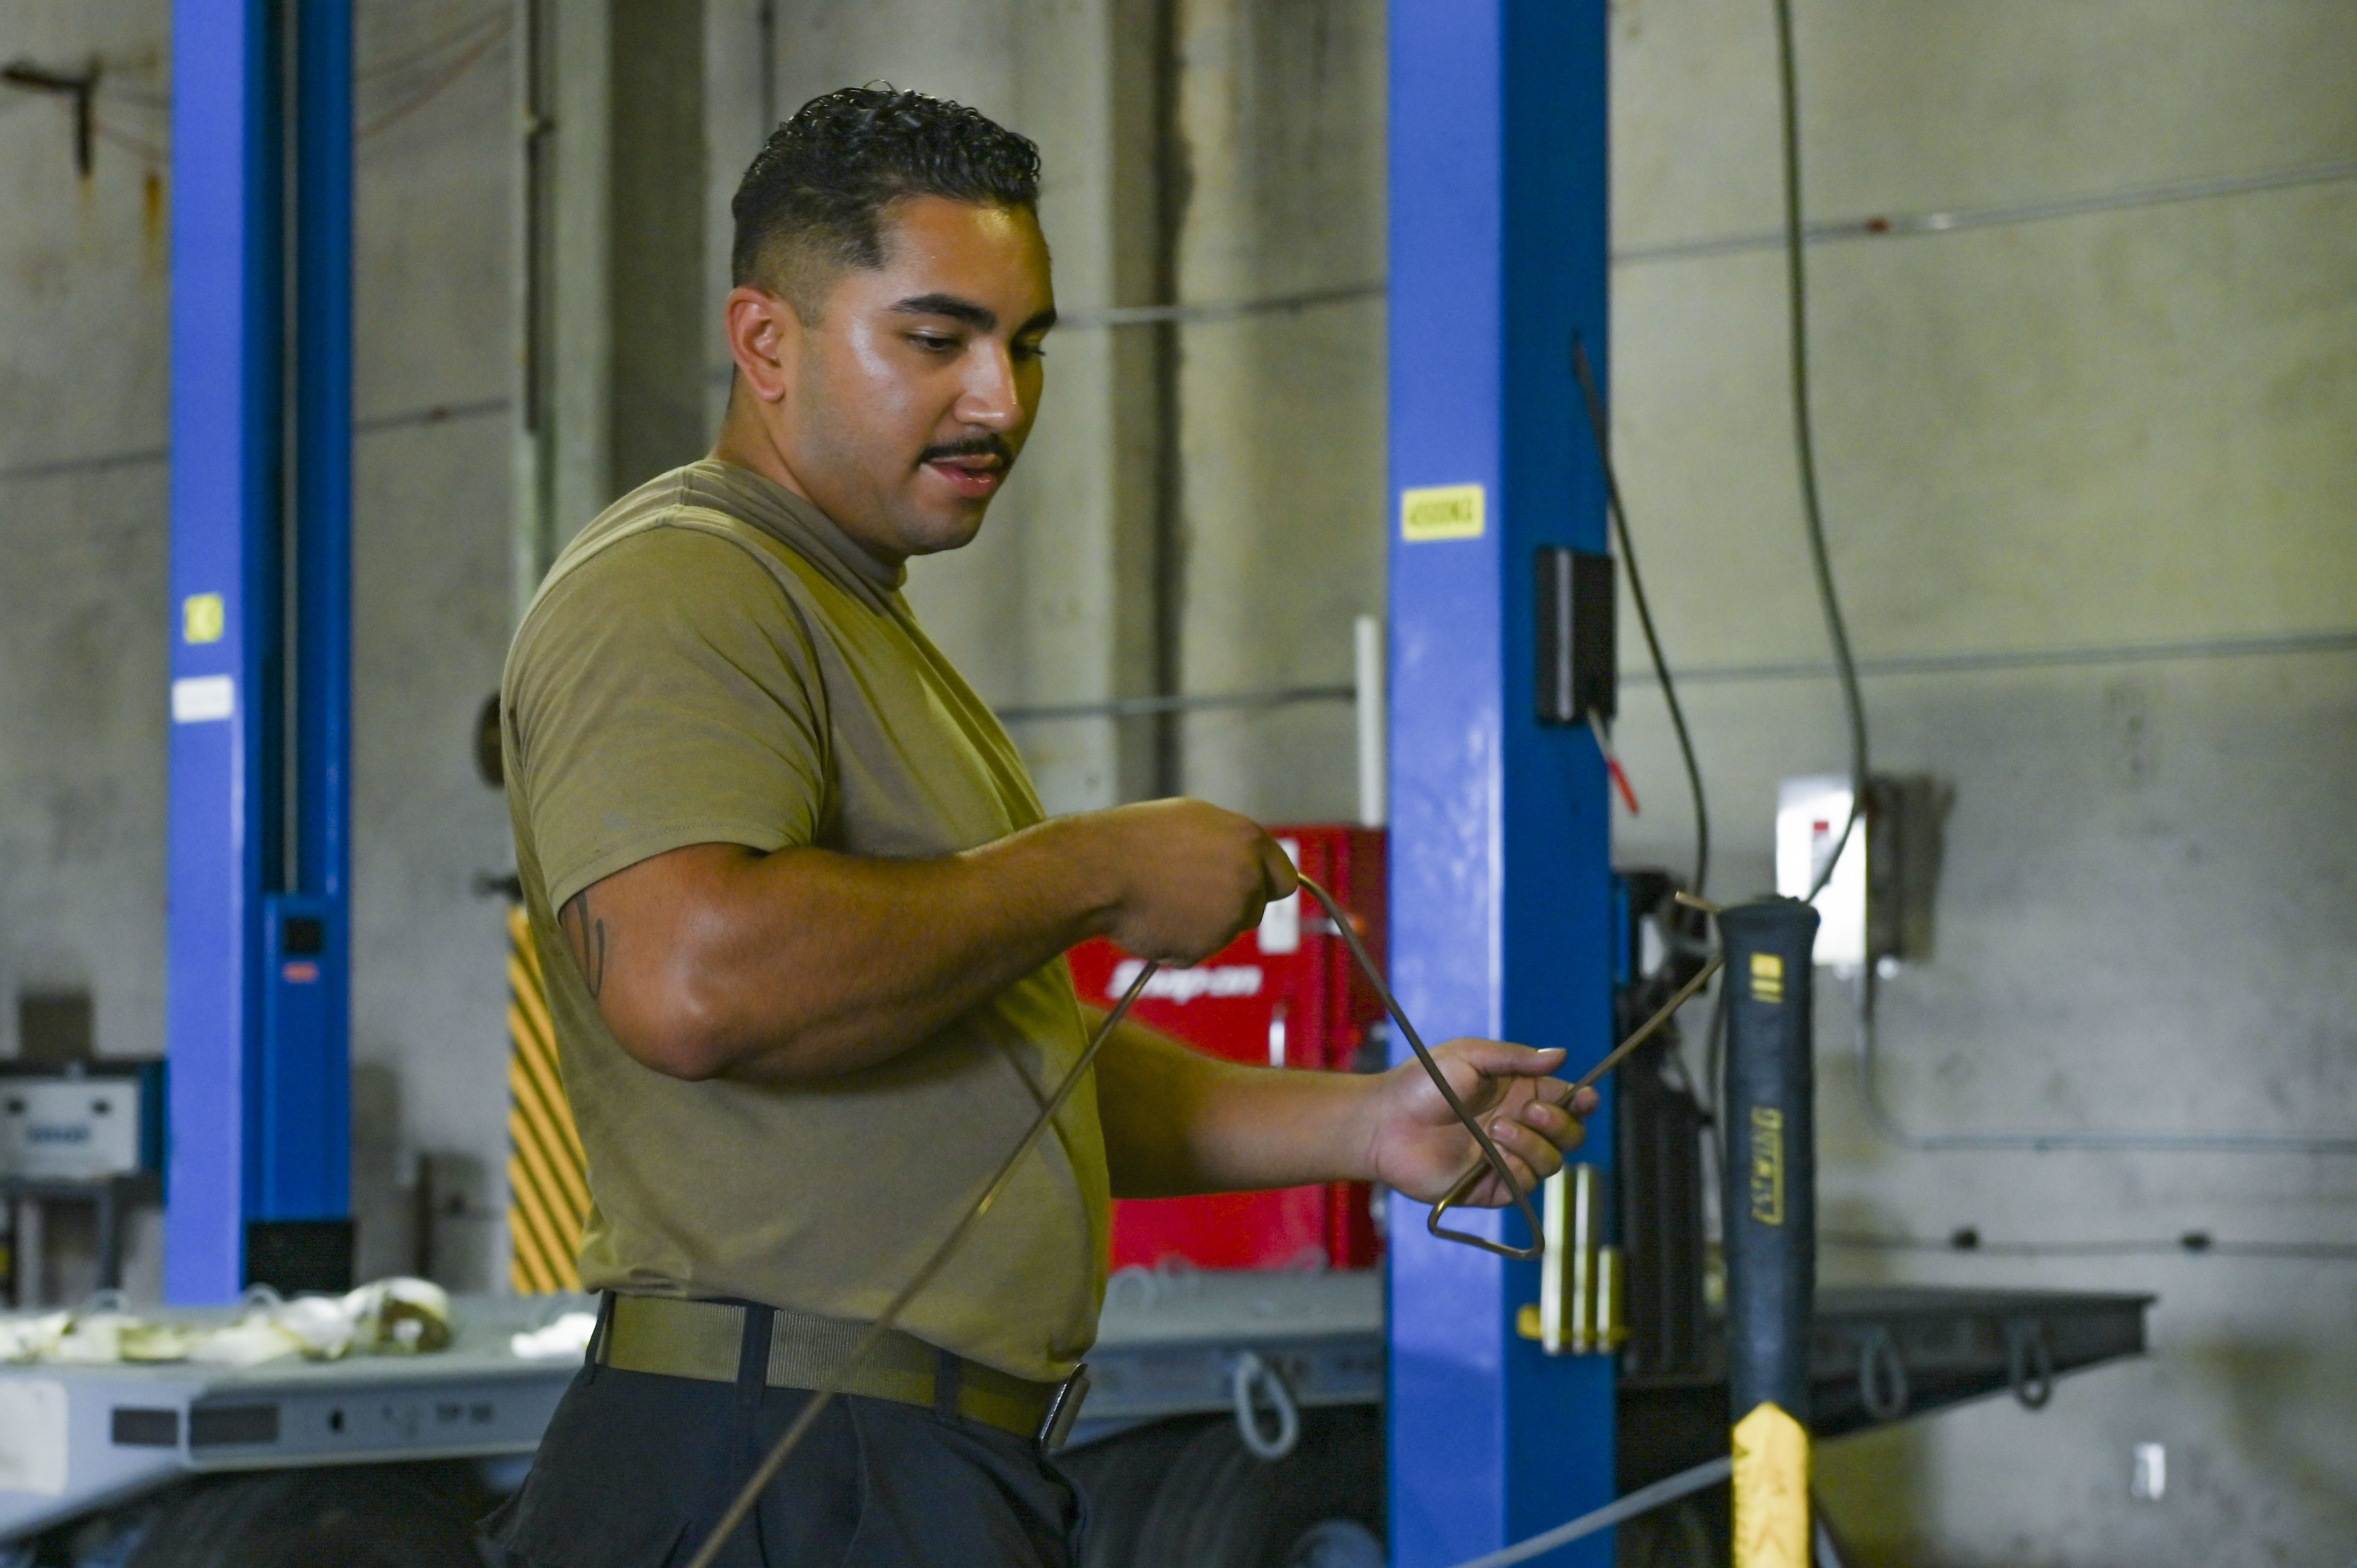 Senior Airman Jonathan Enriquez prepares to install a copper-nickel alloy brake line on a munitions trailer. U.S. Air Force photo by Breanna Christopher Volkmar.